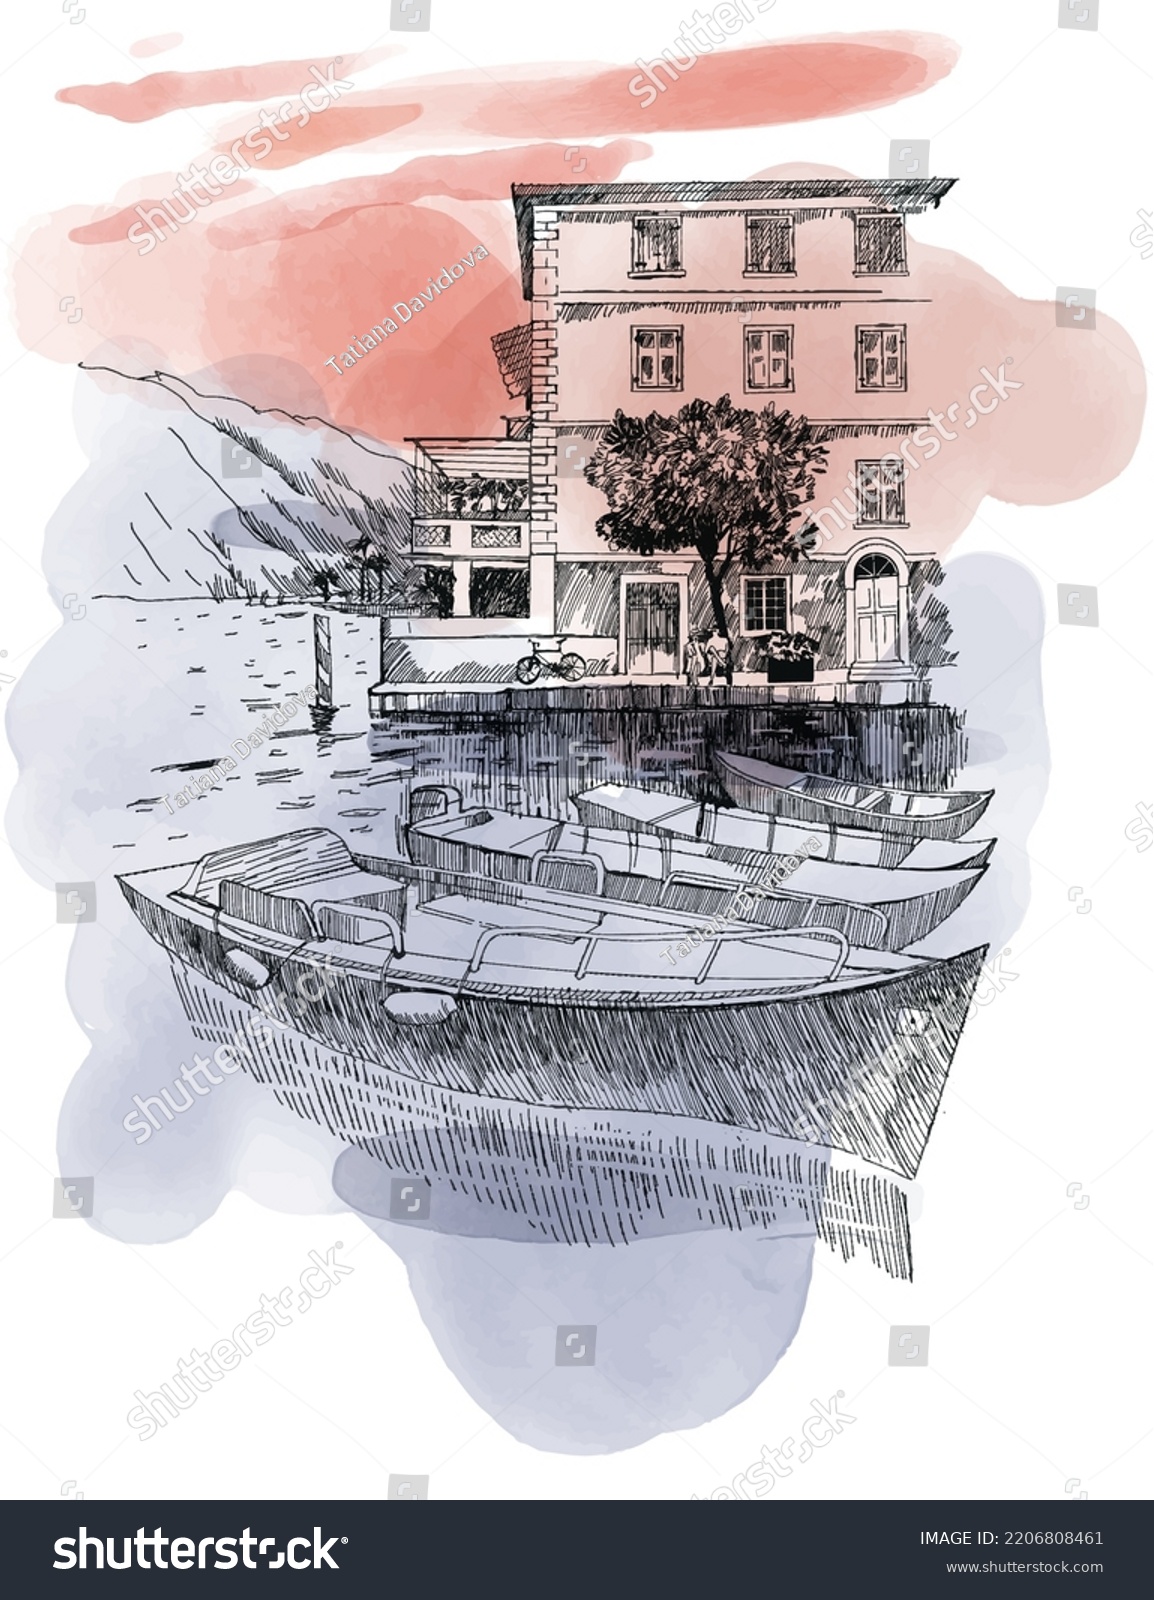 SVG of A tourist italy city and garda lake. Watercolor sketch illustration svg